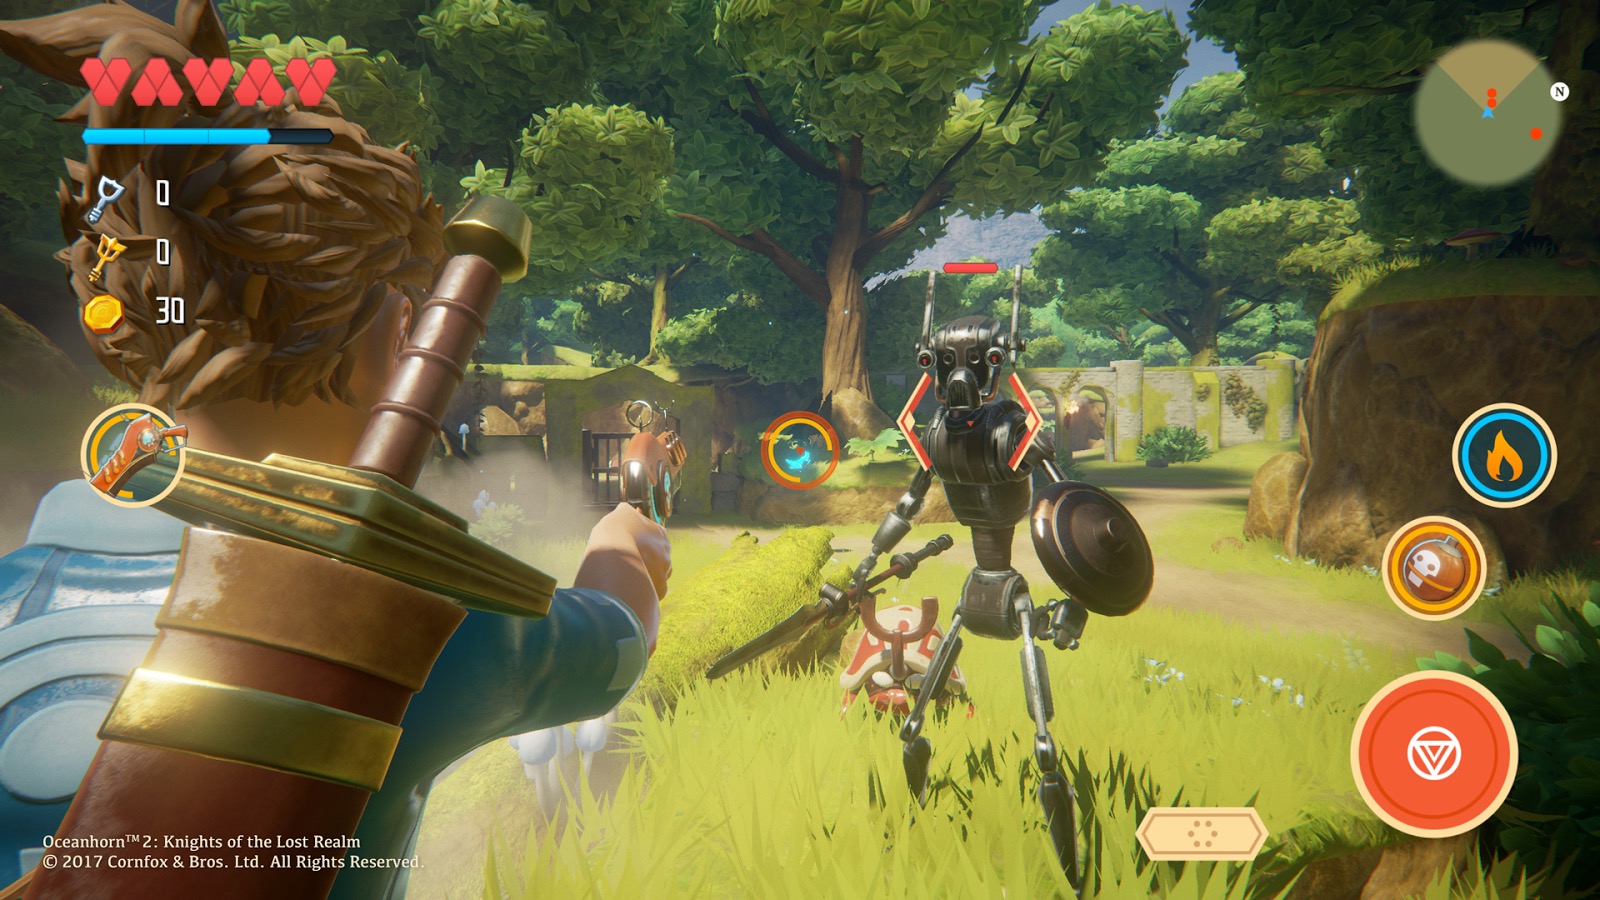 'Oceanhorn 2: Knights of the Lost Realm' will be Playable at Nordic Game Conference Next Month